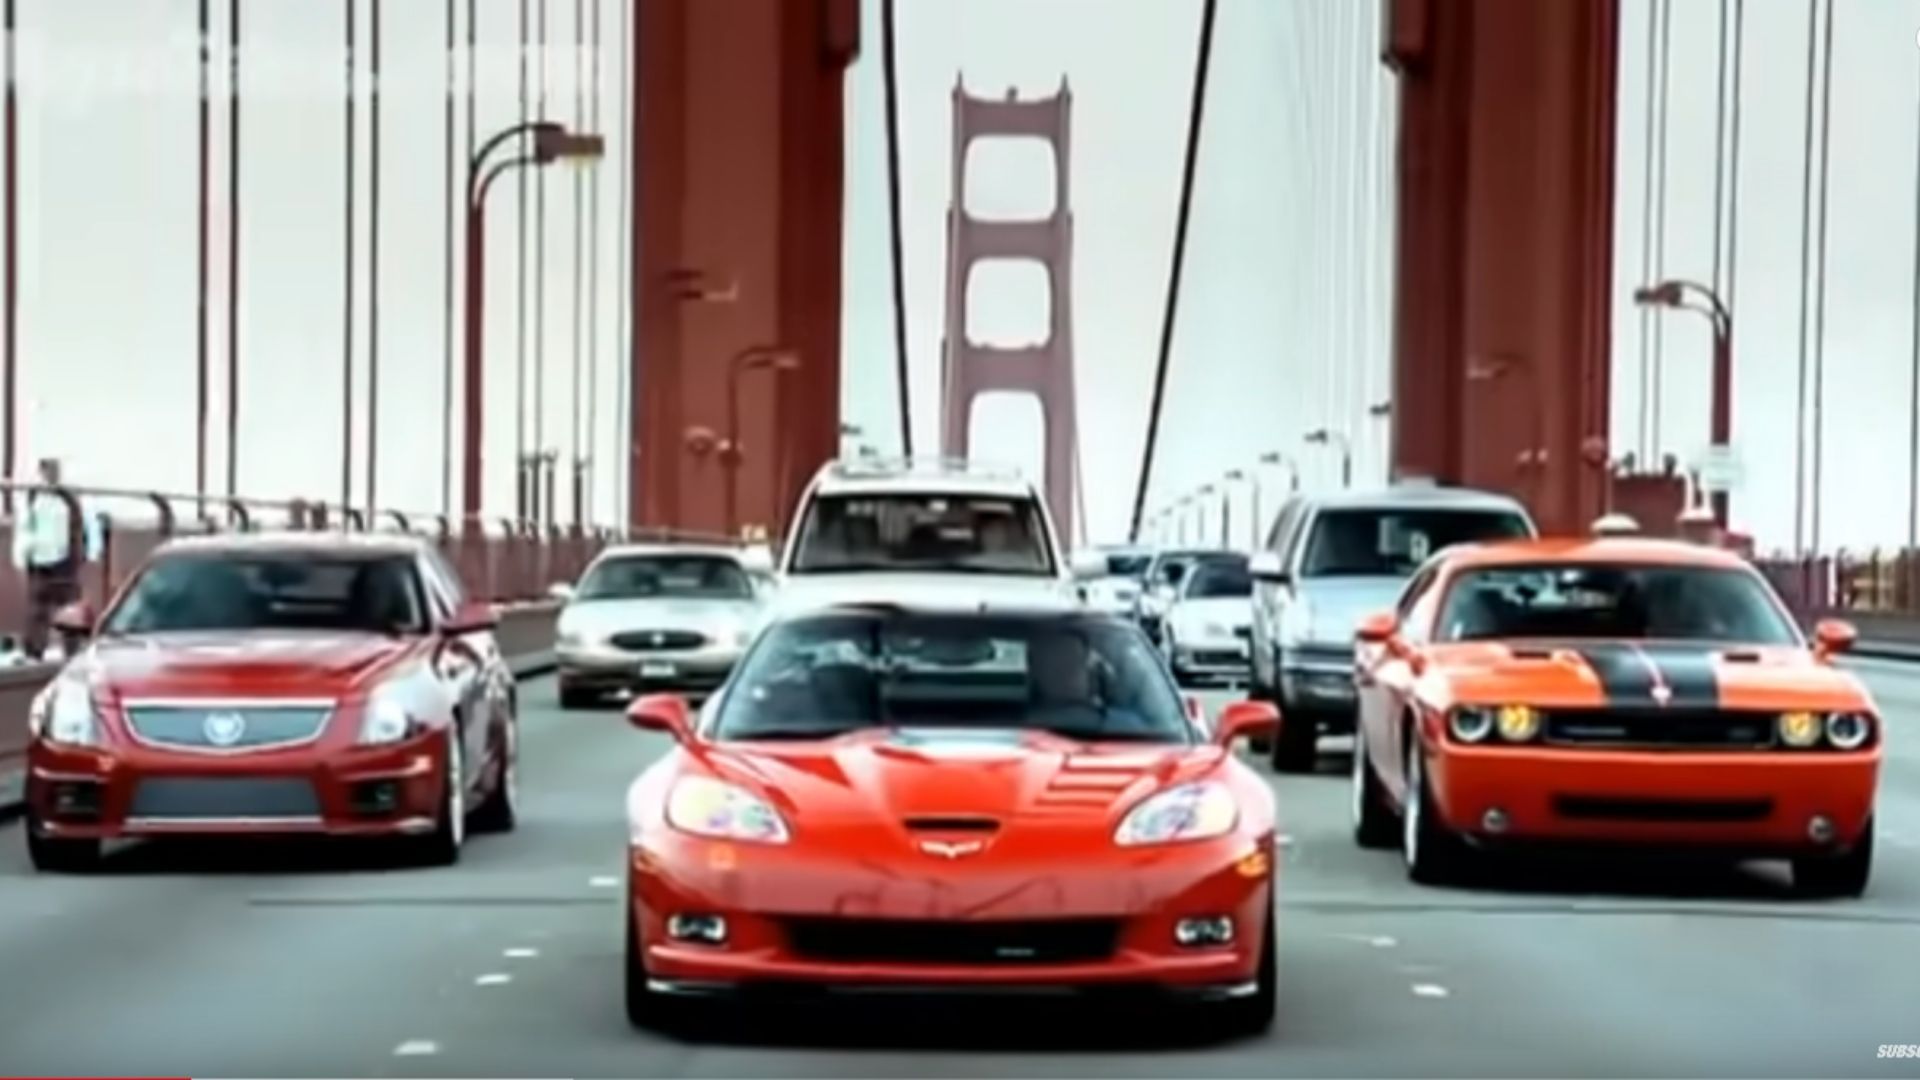 Top Gear’s American Muscle Cars Episode Was Revealing